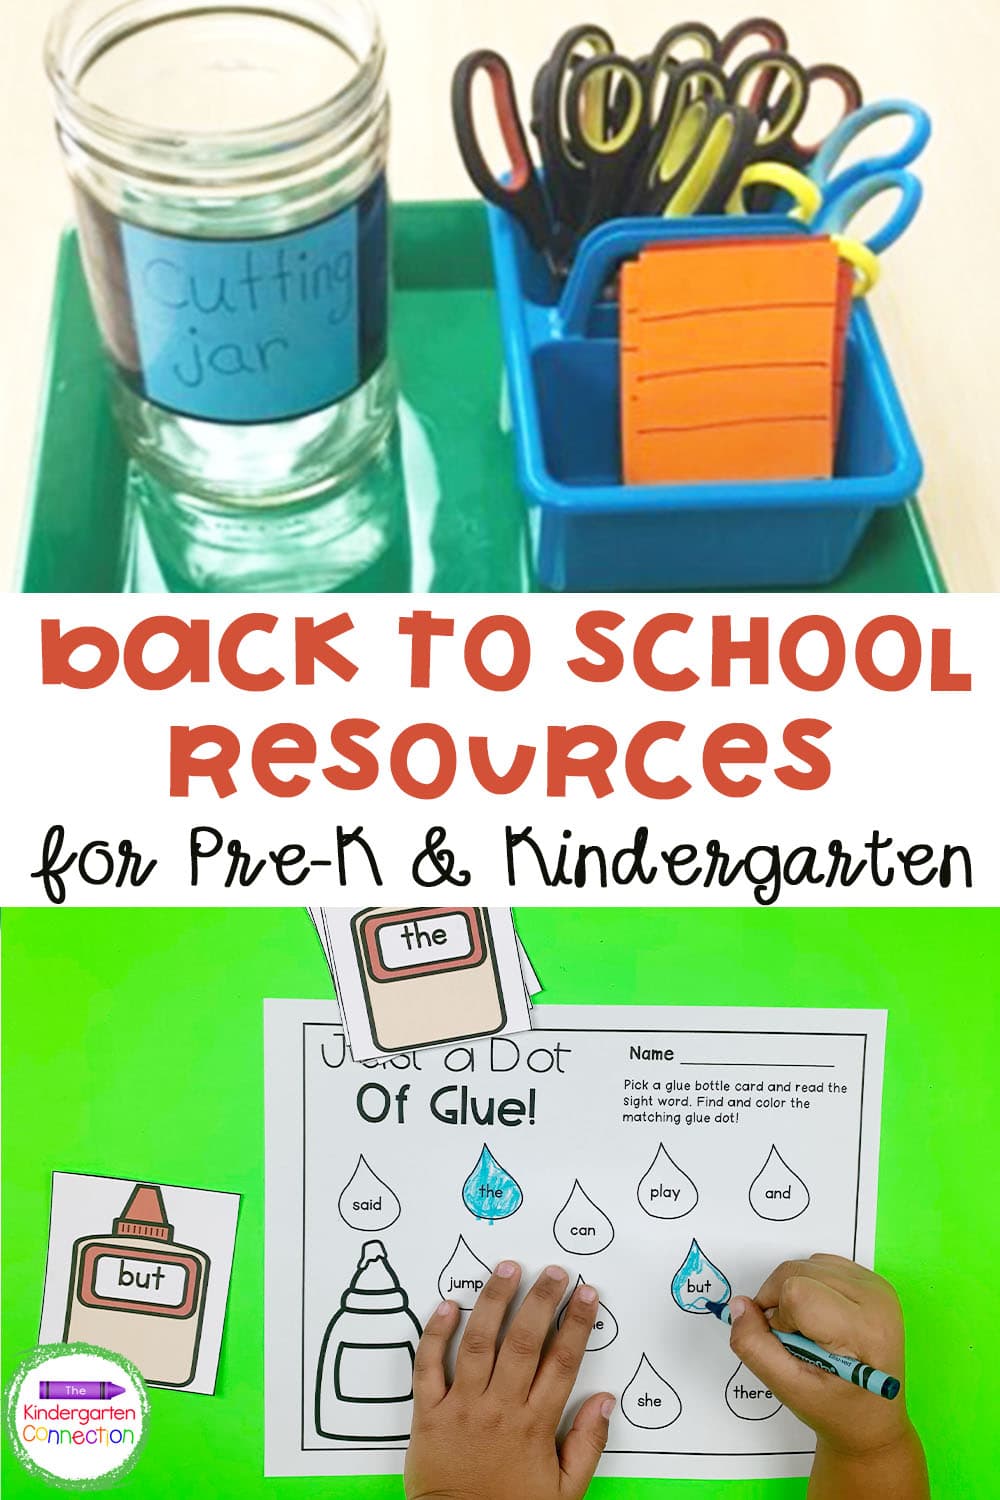 We are here to help you with some of our favorite Back to School resources and activities perfect for your Pre-K or Kindergarten classroom!